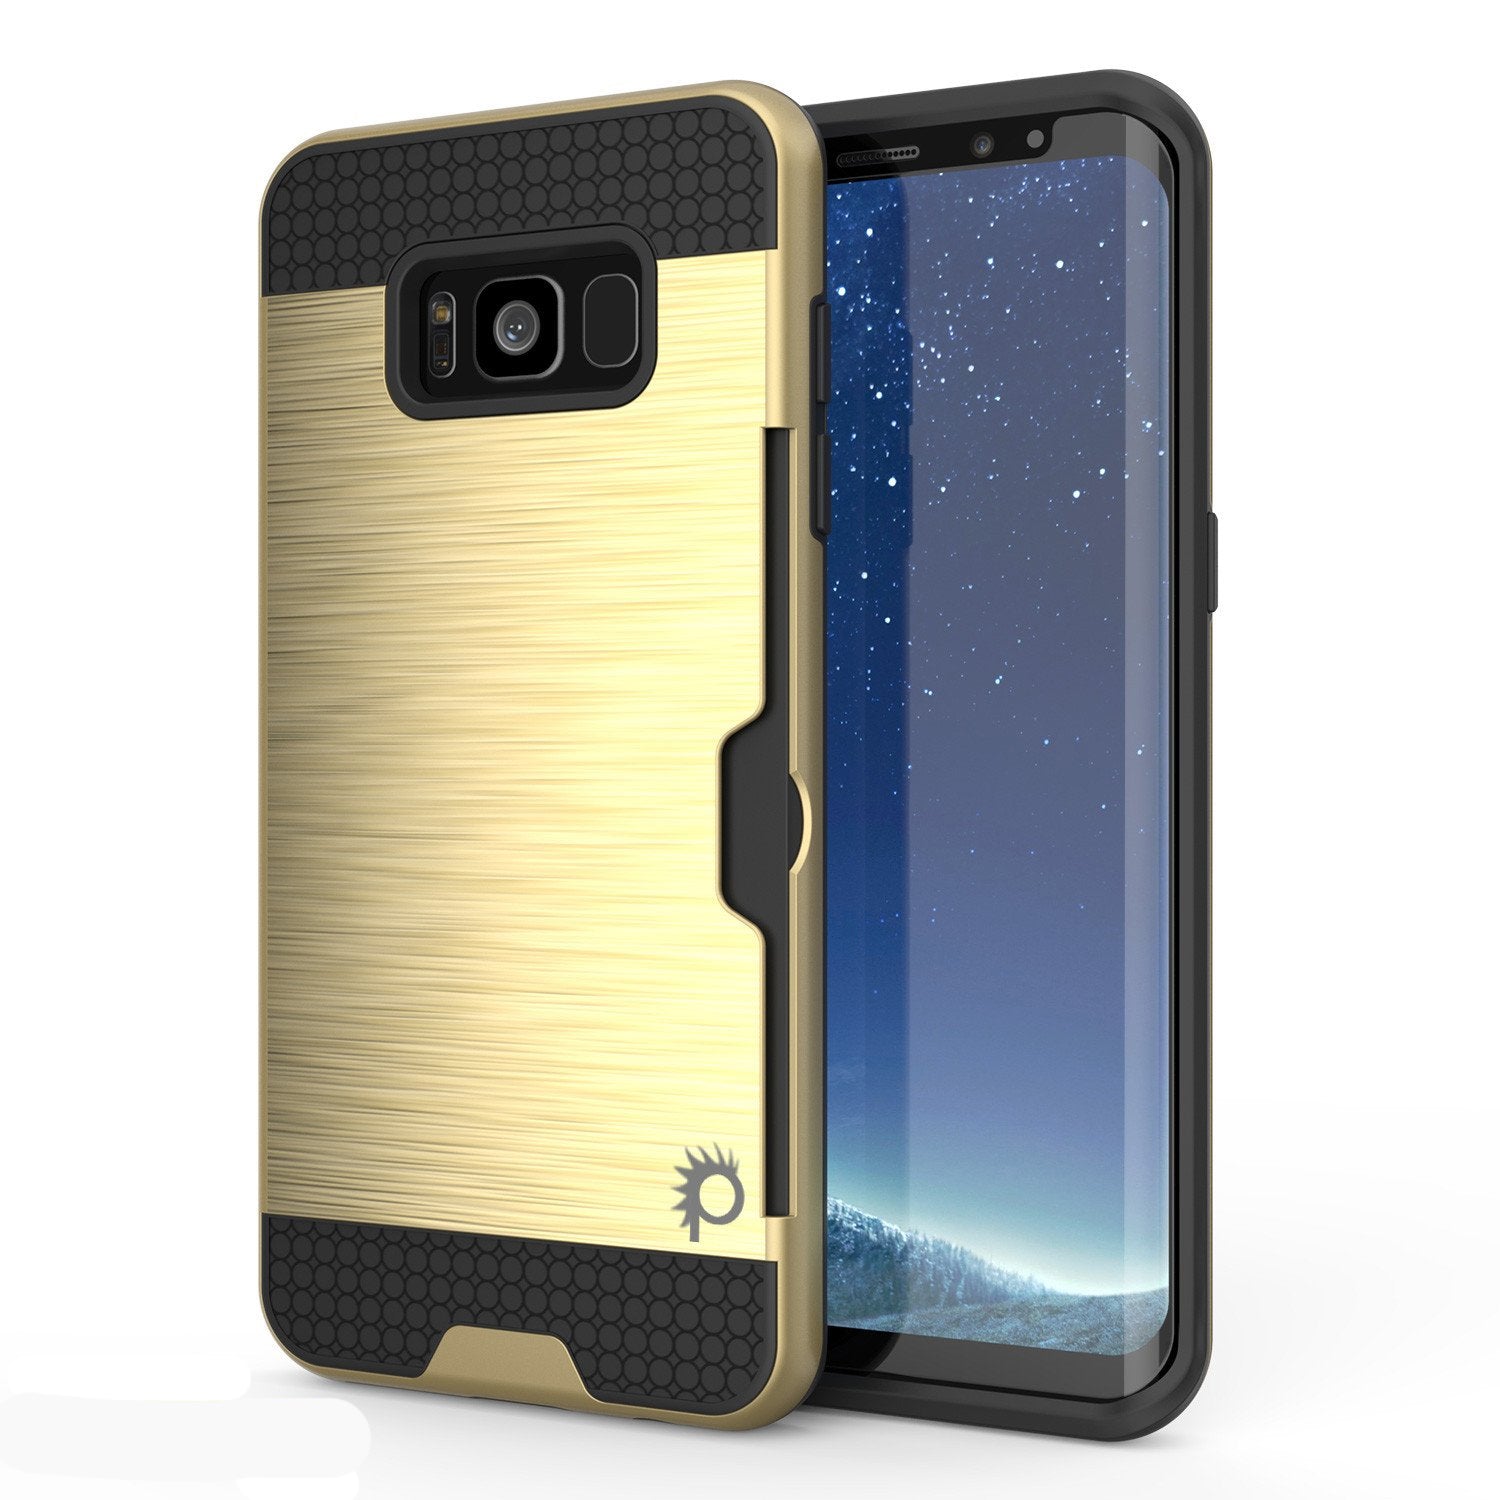 Galaxy S8 Case, PUNKcase [SLOT Series] [Slim Fit] Dual-Layer Armor Cover w/Integrated Anti-Shock System, Credit Card Slot [Gold] (Color in image: Gold)